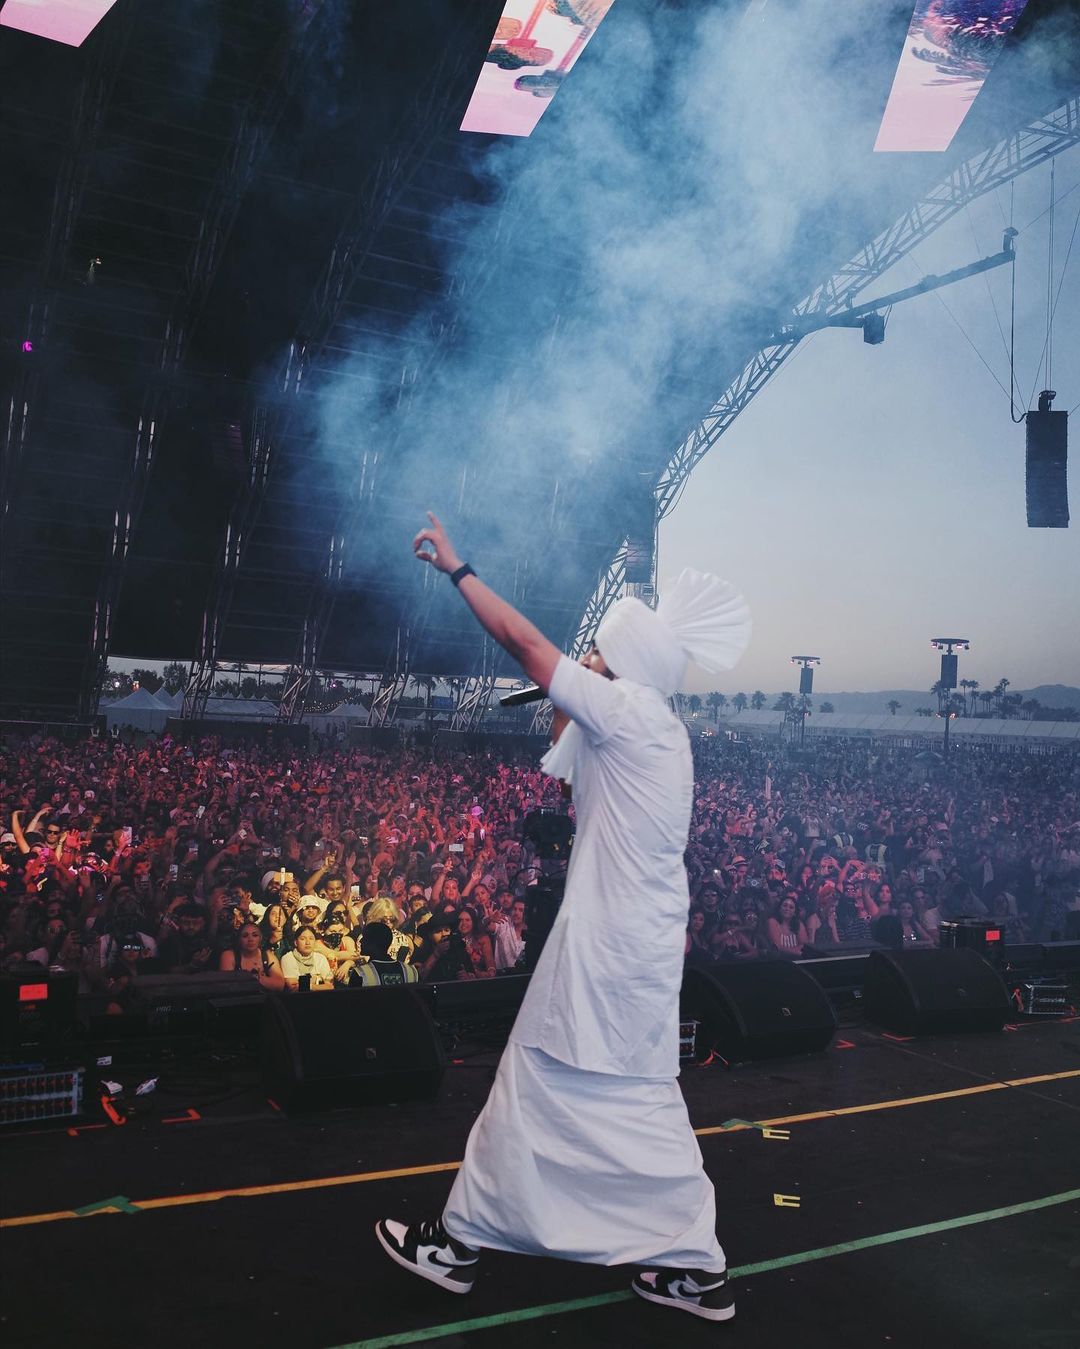 Diljit Dosanjh adds Punjabi Punch to second Coachella performance in white  tehmat-kurta styled with sneakers. All pics